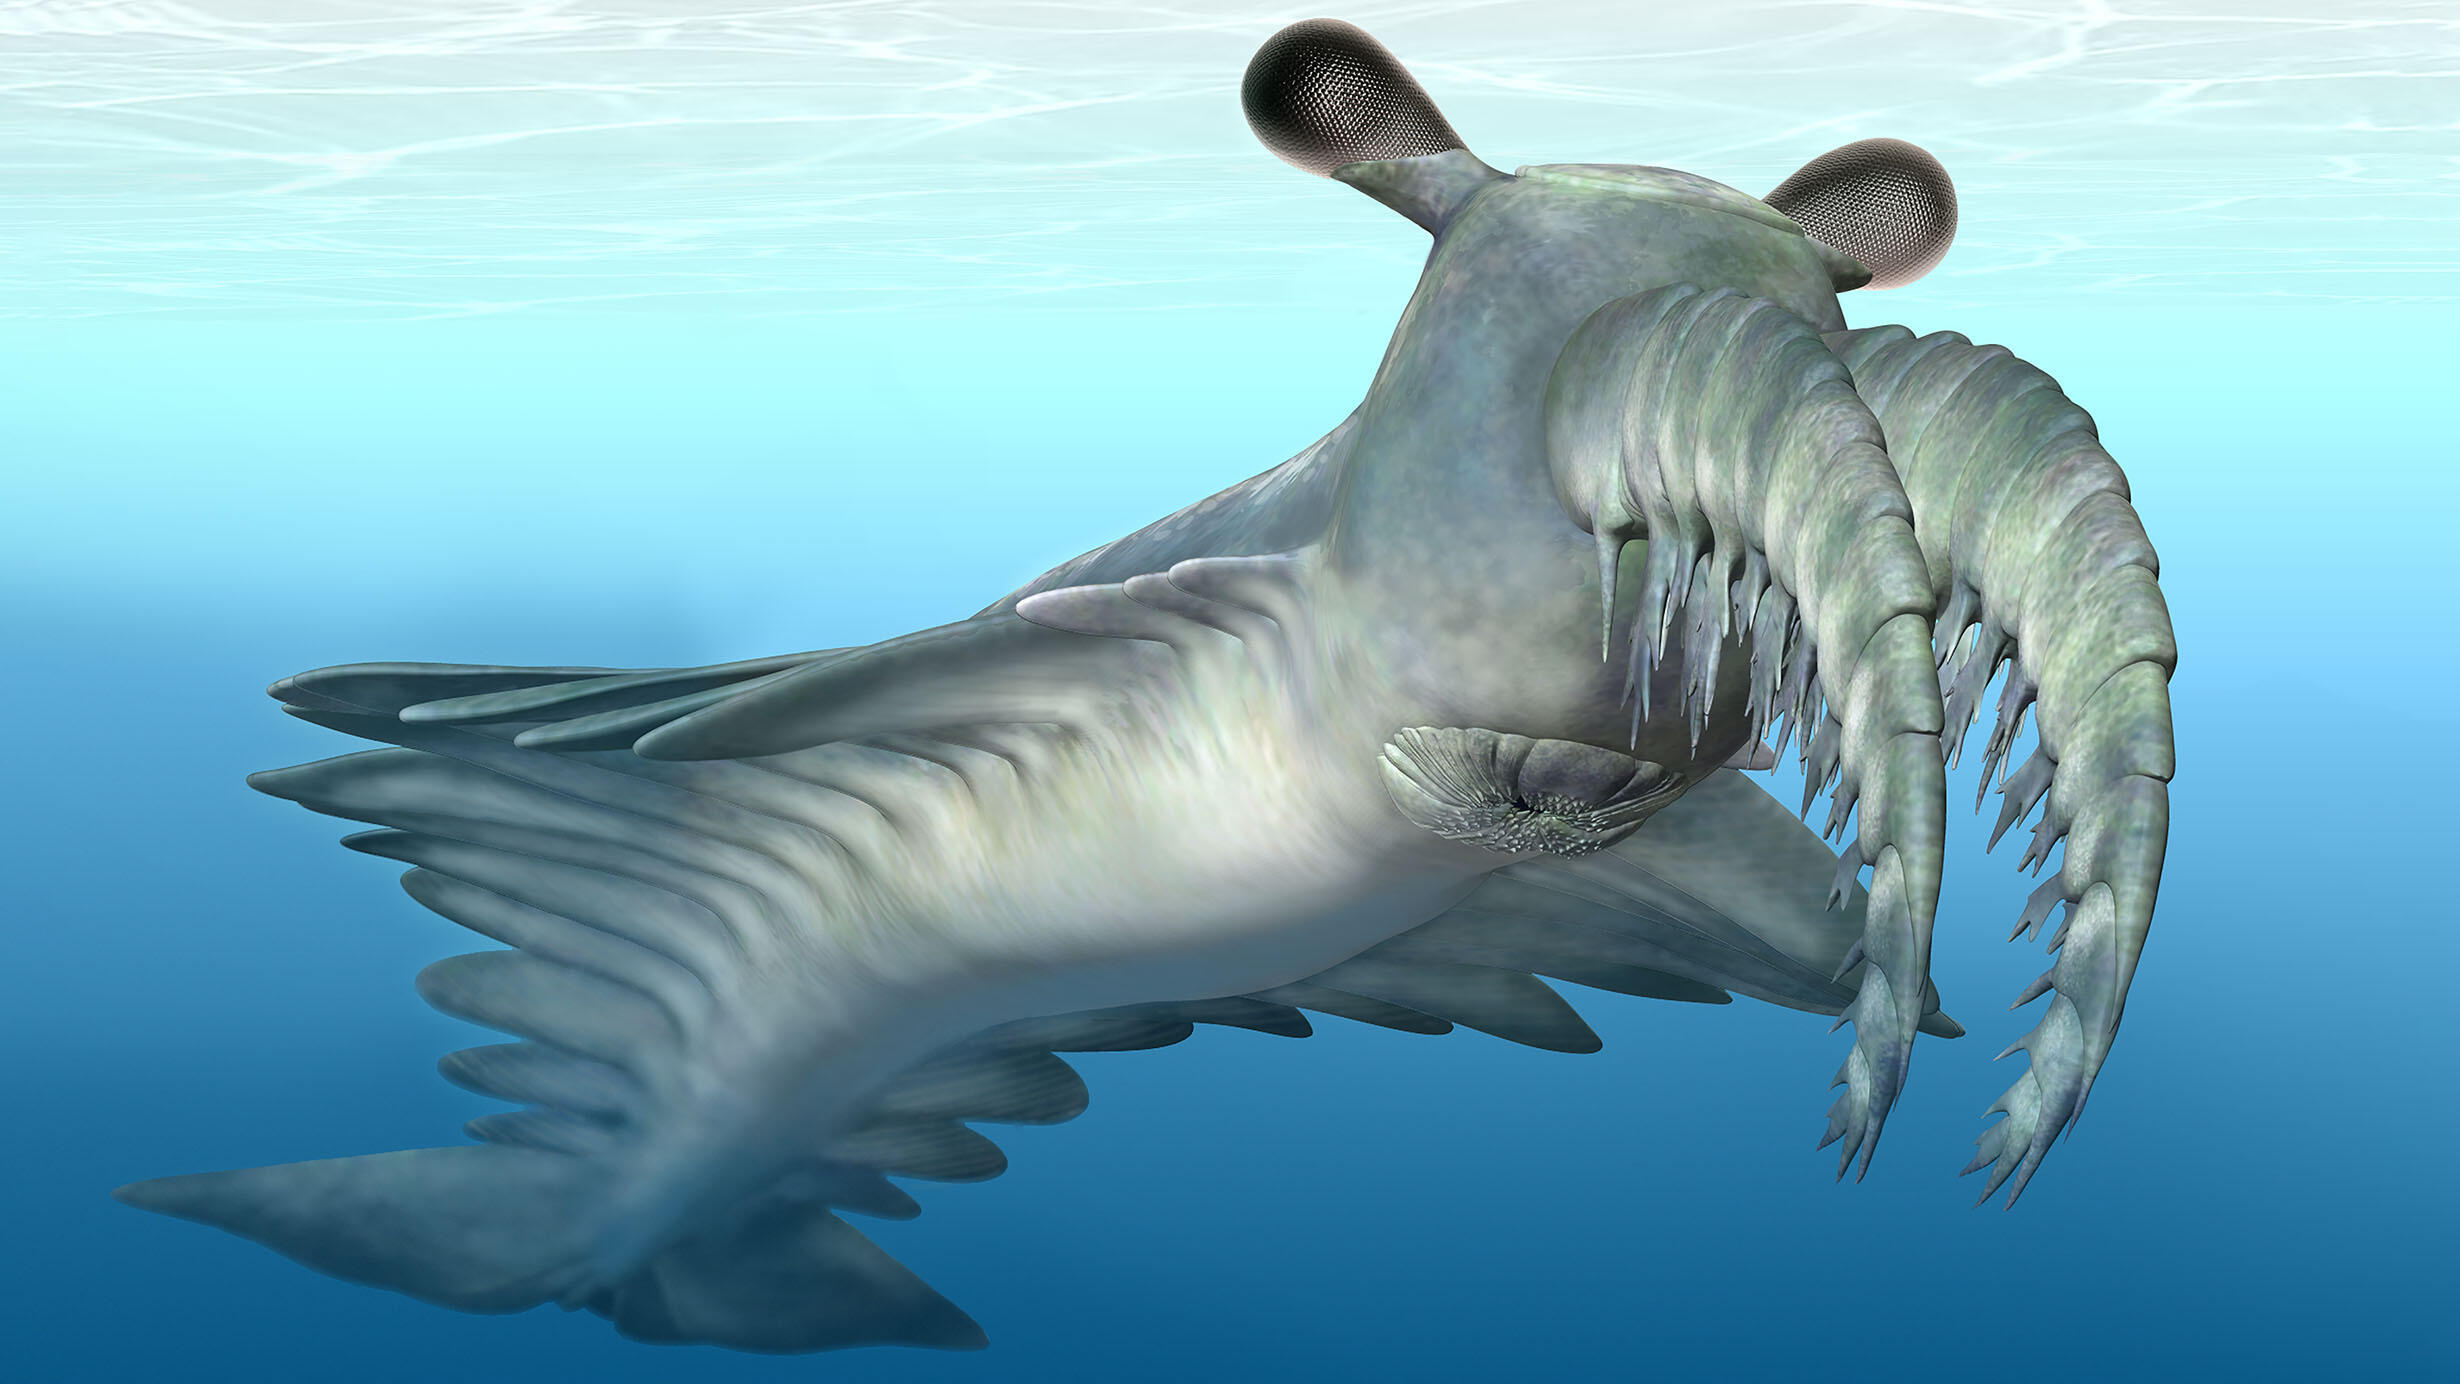 Illustration of an Anomalocaris, an extinct apex predator with many leg-like appendages, a ring shaped mouth, and two armored appendages on the head.